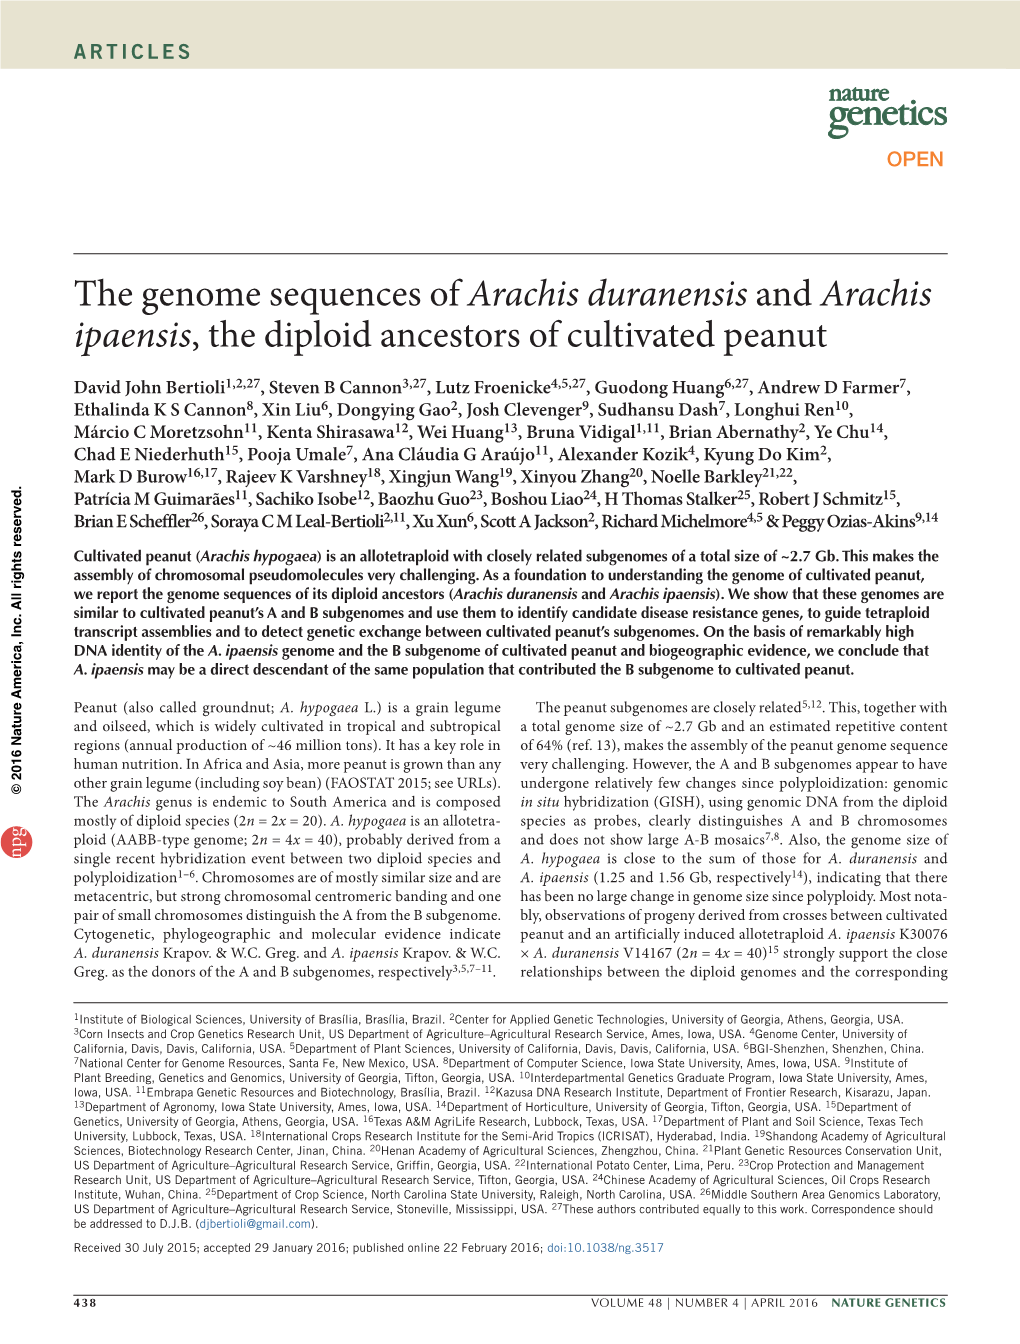 The Genome Sequences of Arachis Duranensis and Arachis Ipaensis, the Diploid Ancestors of Cultivated Peanut